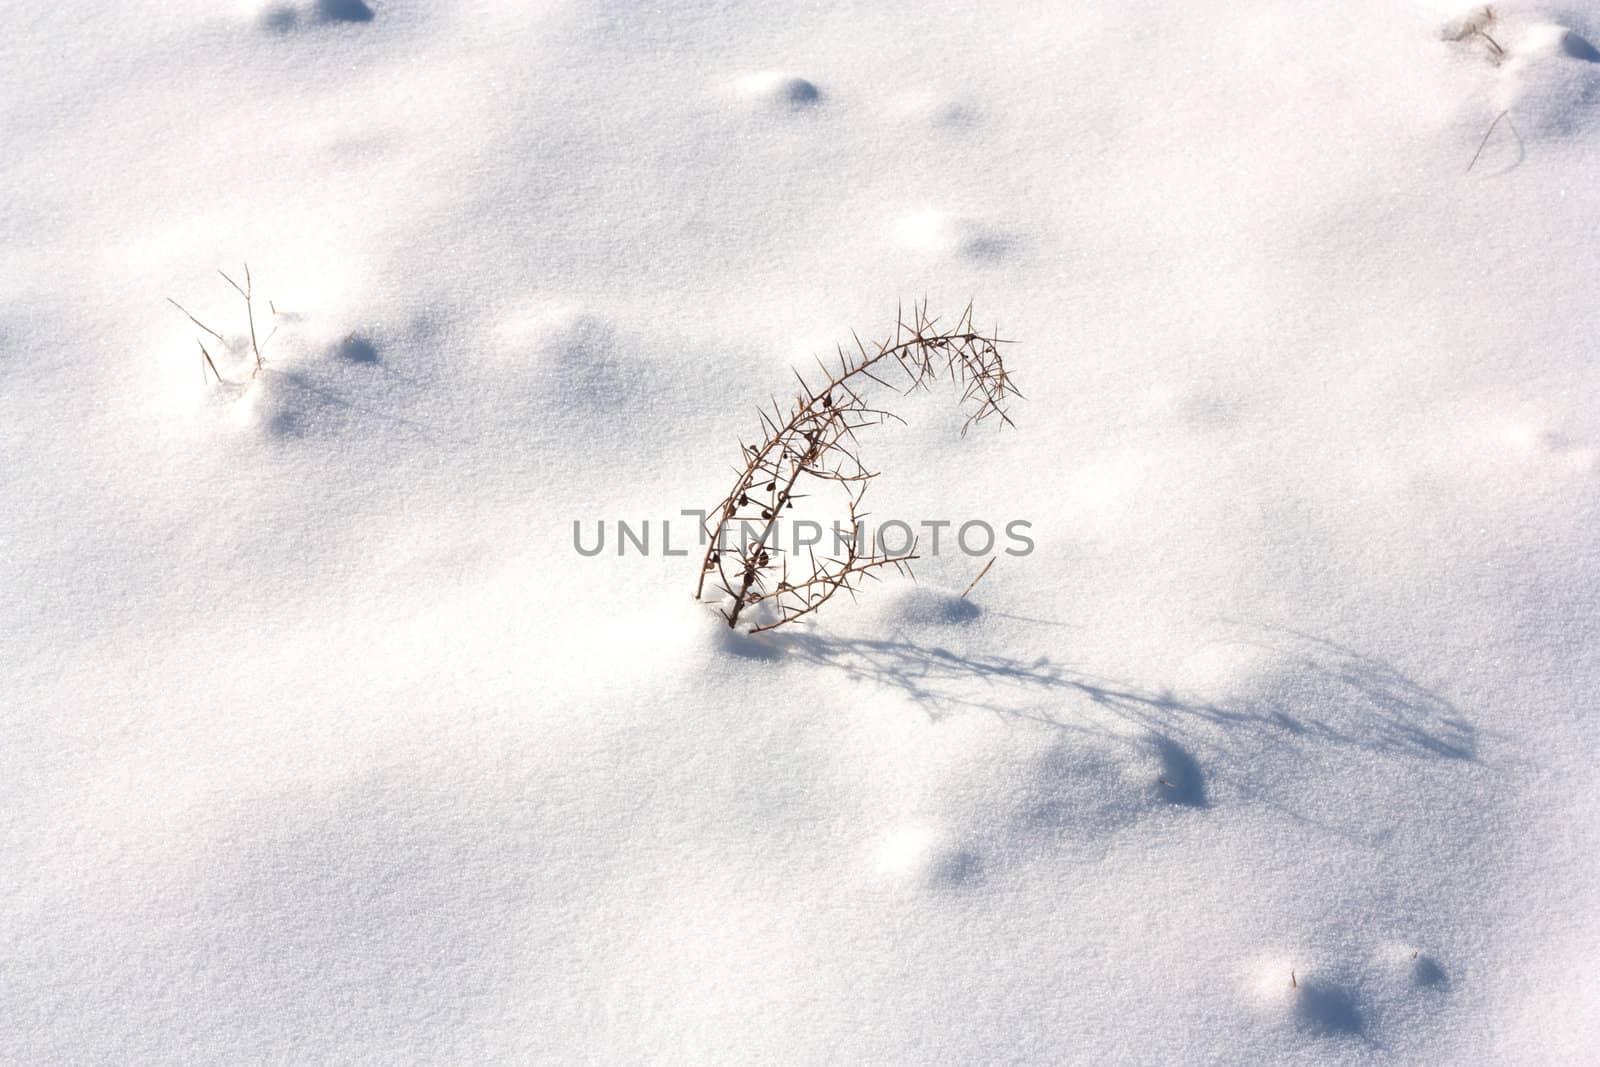 Dried plant in snow surface  by schankz